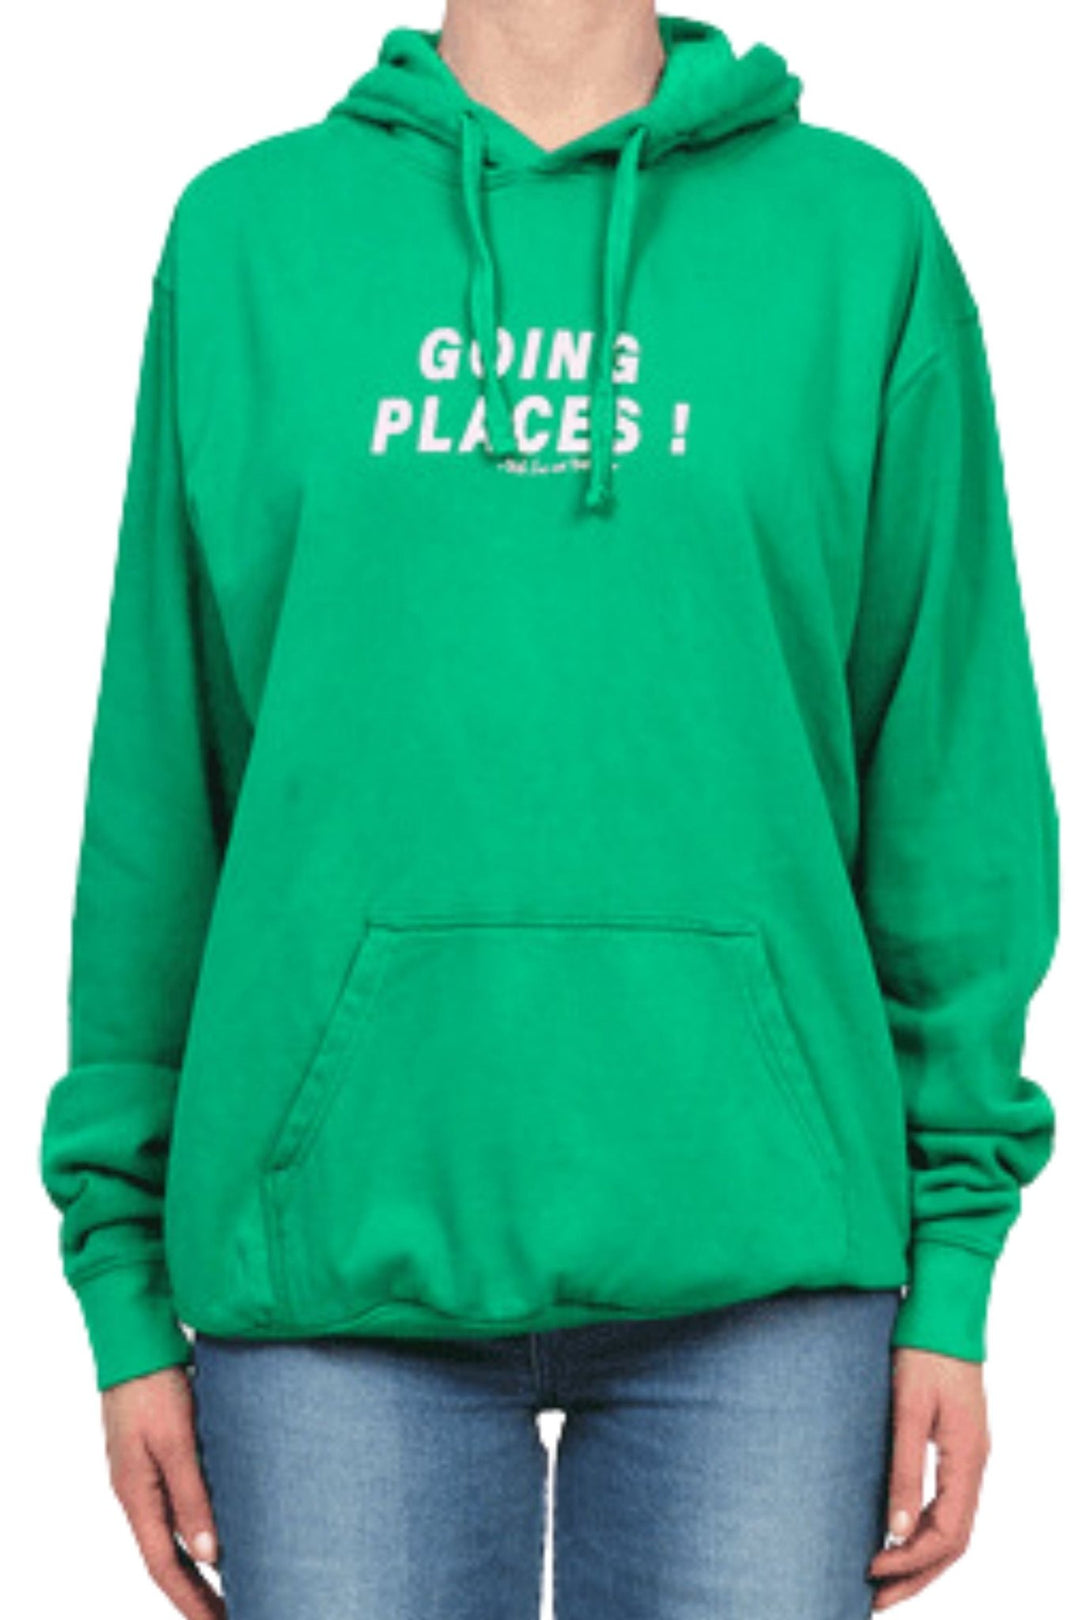 Going Places Hoody Vintage Closet Original Price $149 - Since I Found You